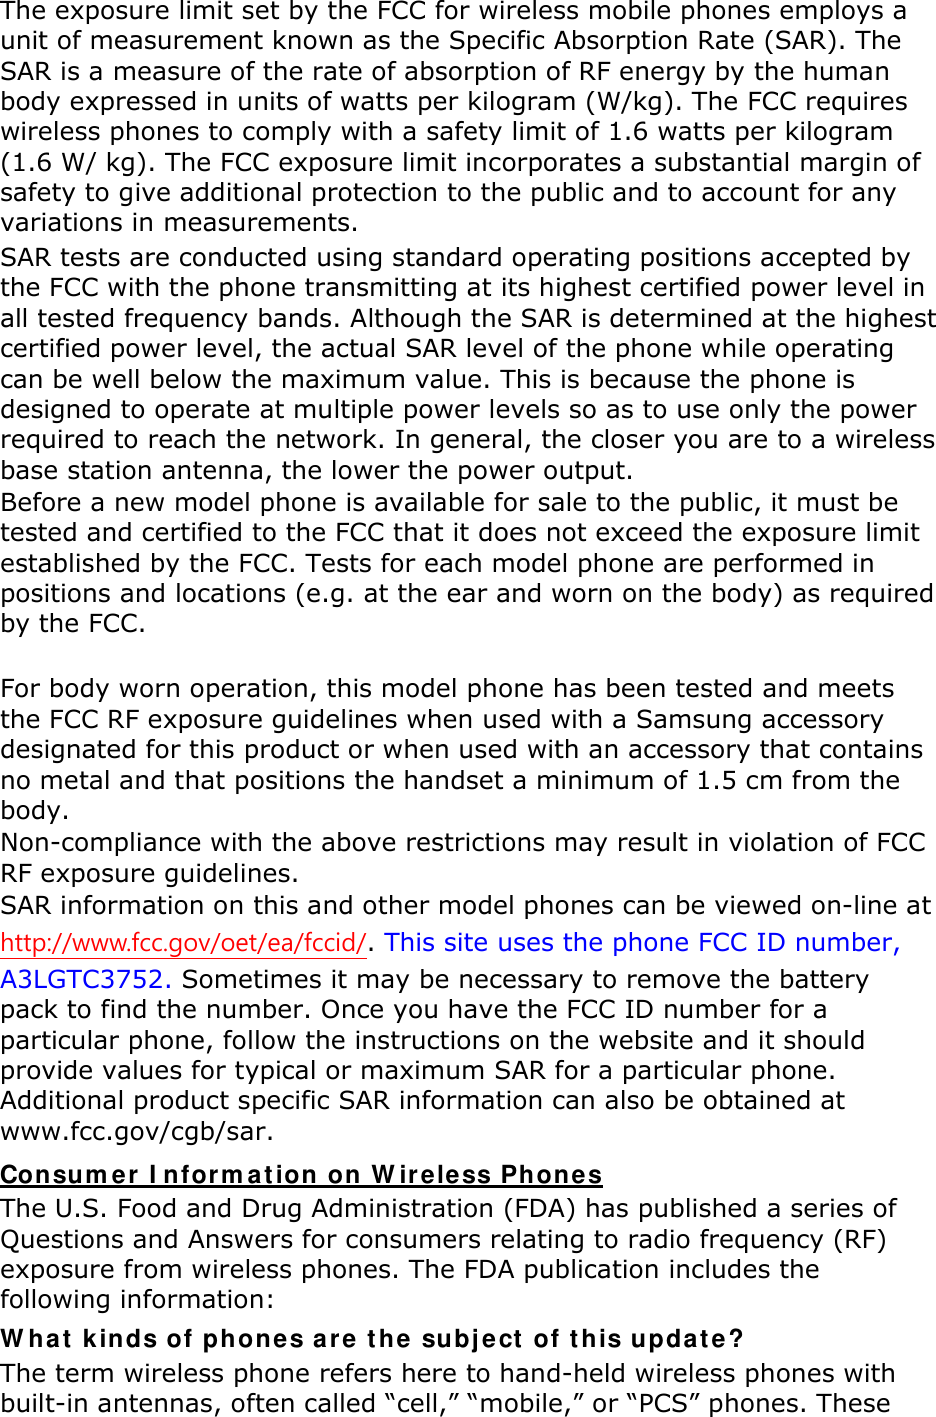 The exposure limit set by the FCC for wireless mobile phones employs a unit of measurement known as the Specific Absorption Rate (SAR). The SAR is a measure of the rate of absorption of RF energy by the human body expressed in units of watts per kilogram (W/kg). The FCC requires wireless phones to comply with a safety limit of 1.6 watts per kilogram (1.6 W/ kg). The FCC exposure limit incorporates a substantial margin of safety to give additional protection to the public and to account for any variations in measurements. SAR tests are conducted using standard operating positions accepted by the FCC with the phone transmitting at its highest certified power level in all tested frequency bands. Although the SAR is determined at the highest certified power level, the actual SAR level of the phone while operating can be well below the maximum value. This is because the phone is designed to operate at multiple power levels so as to use only the power required to reach the network. In general, the closer you are to a wireless base station antenna, the lower the power output. Before a new model phone is available for sale to the public, it must be tested and certified to the FCC that it does not exceed the exposure limit established by the FCC. Tests for each model phone are performed in positions and locations (e.g. at the ear and worn on the body) as required by the FCC.      For body worn operation, this model phone has been tested and meets the FCC RF exposure guidelines when used with a Samsung accessory designated for this product or when used with an accessory that contains no metal and that positions the handset a minimum of 1.5 cm from the body.   Non-compliance with the above restrictions may result in violation of FCC RF exposure guidelines. SAR information on this and other model phones can be viewed on-line at http://www.fcc.gov/oet/ea/fccid/. This site uses the phone FCC ID number, A3LGTC3752. Sometimes it may be necessary to remove the battery pack to find the number. Once you have the FCC ID number for a particular phone, follow the instructions on the website and it should provide values for typical or maximum SAR for a particular phone. Additional product specific SAR information can also be obtained at www.fcc.gov/cgb/sar. Con sum er  I nform ation on W ireless Phone s The U.S. Food and Drug Administration (FDA) has published a series of Questions and Answers for consumers relating to radio frequency (RF) exposure from wireless phones. The FDA publication includes the following information: W hat  k inds of phones a r e t he subj e ct  of t his u pdat e ? The term wireless phone refers here to hand-held wireless phones with built-in antennas, often called “cell,” “mobile,” or “PCS” phones. These 